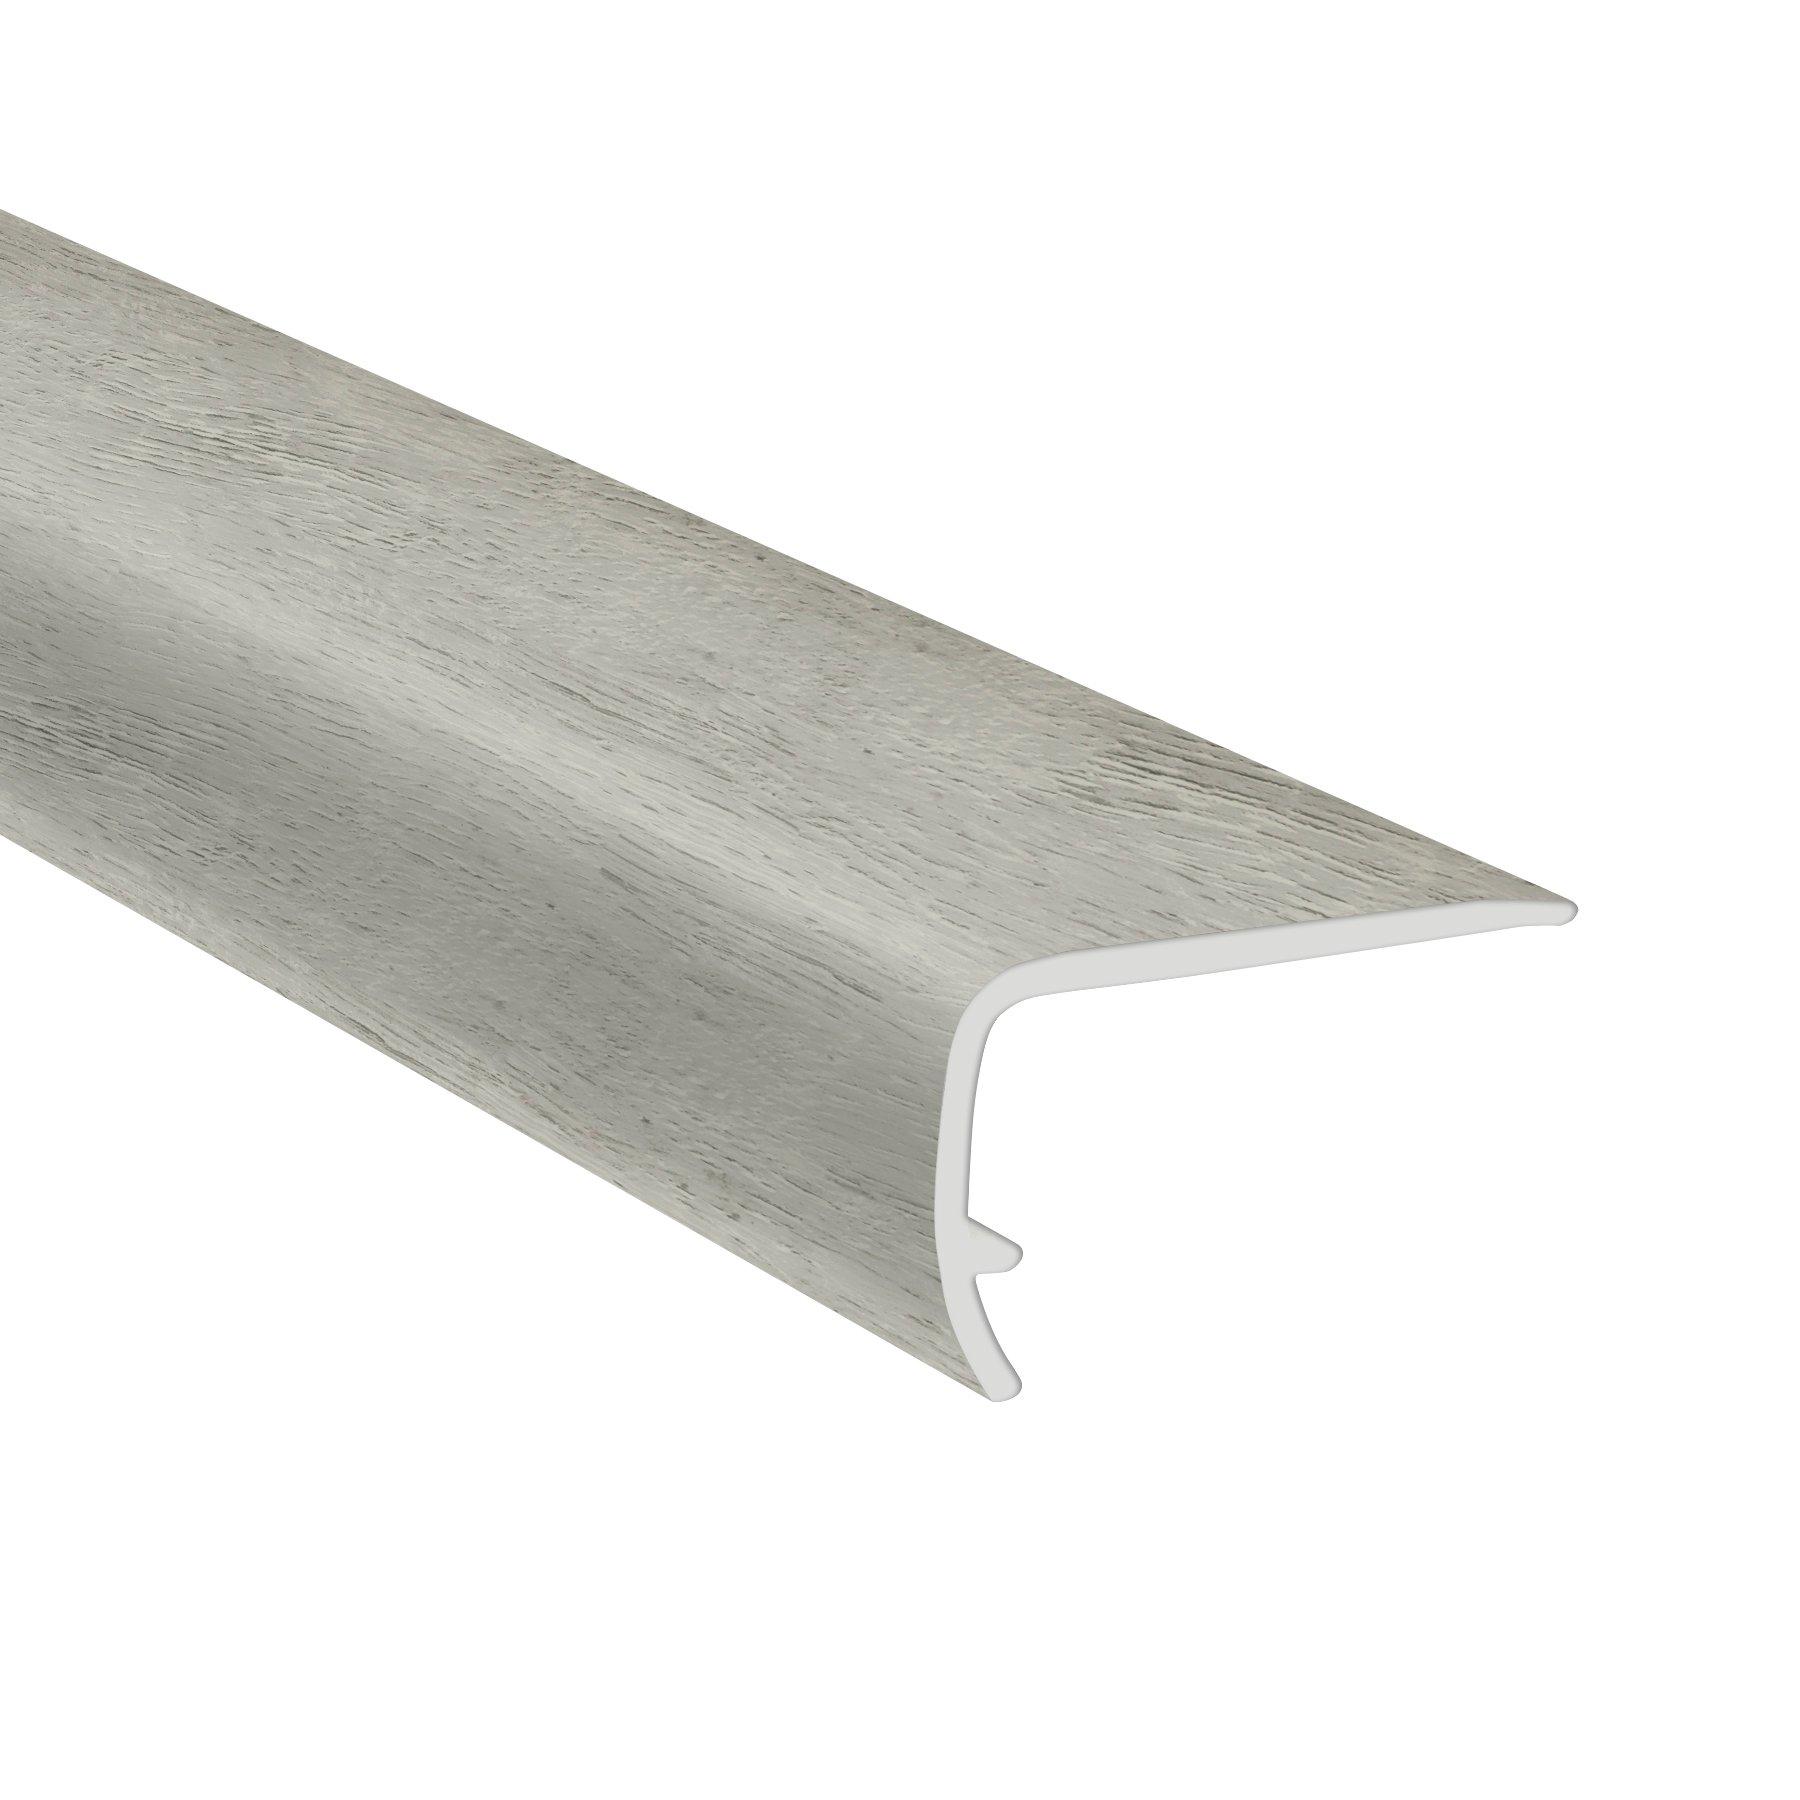 Silver Lake 94in. Vinyl Overlapping Stair Nose